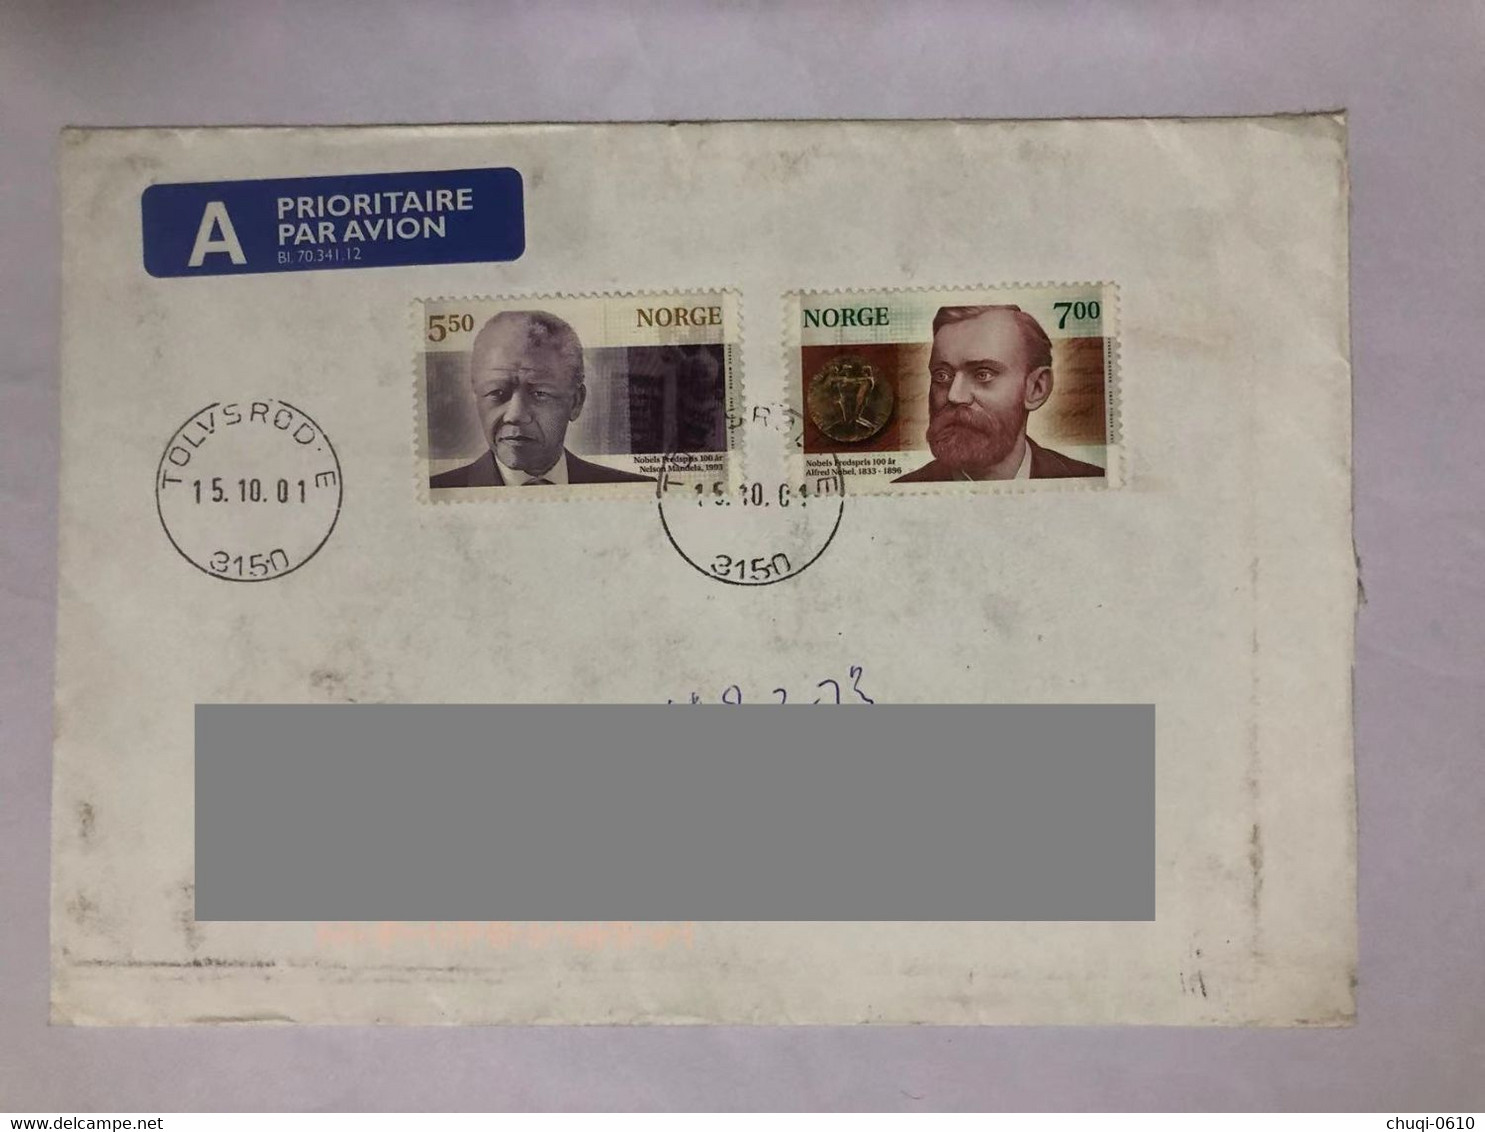 Norway Cover Sent To China With Stamps, 2001,Centennial Nobel Prize, Mandela，Alfred Bernhard Nobel - Covers & Documents